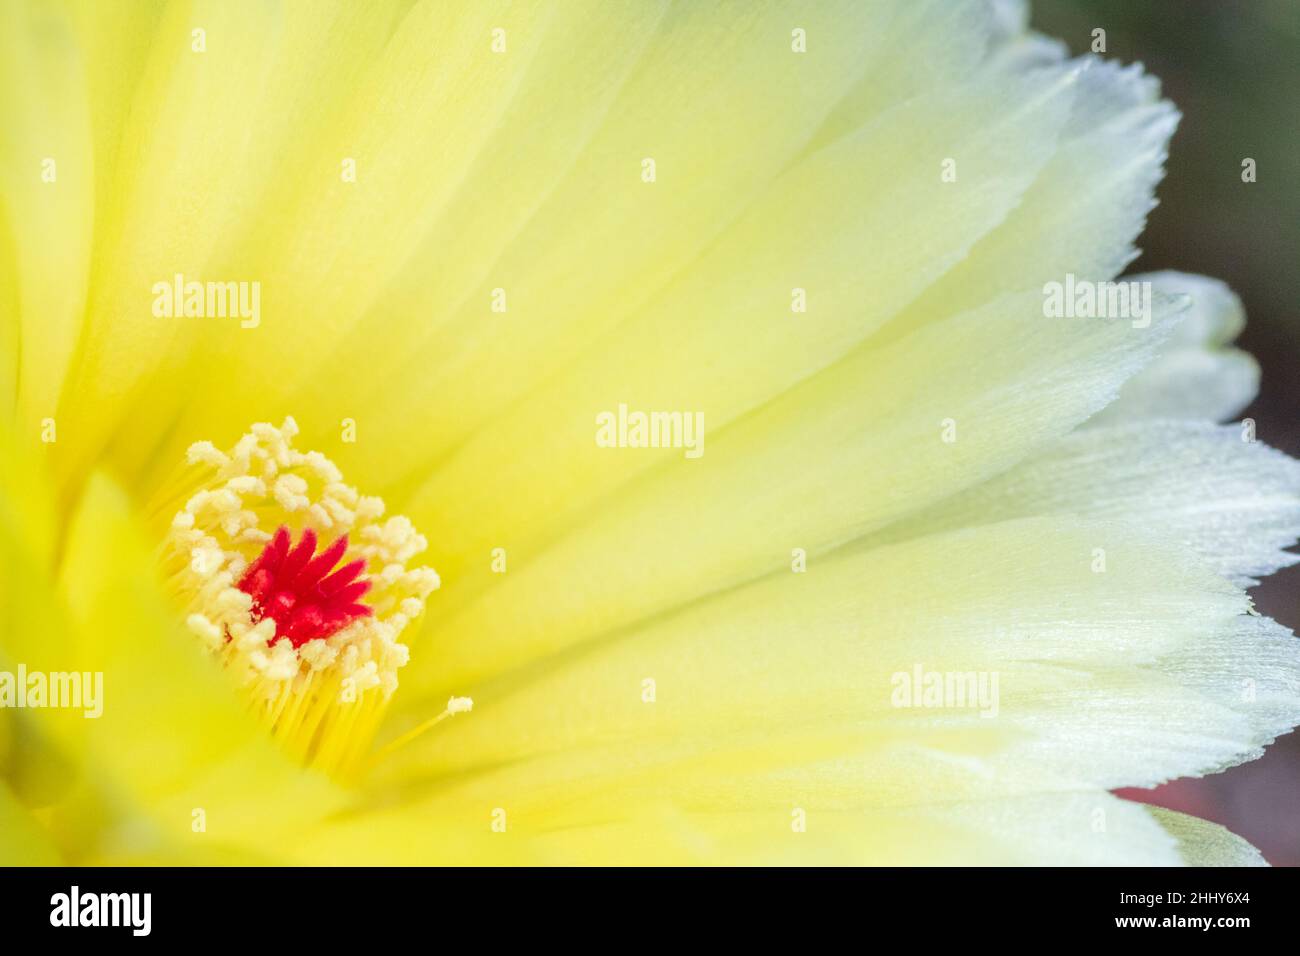 Flower of a blossoming cactus in close-up view. Stock Photo